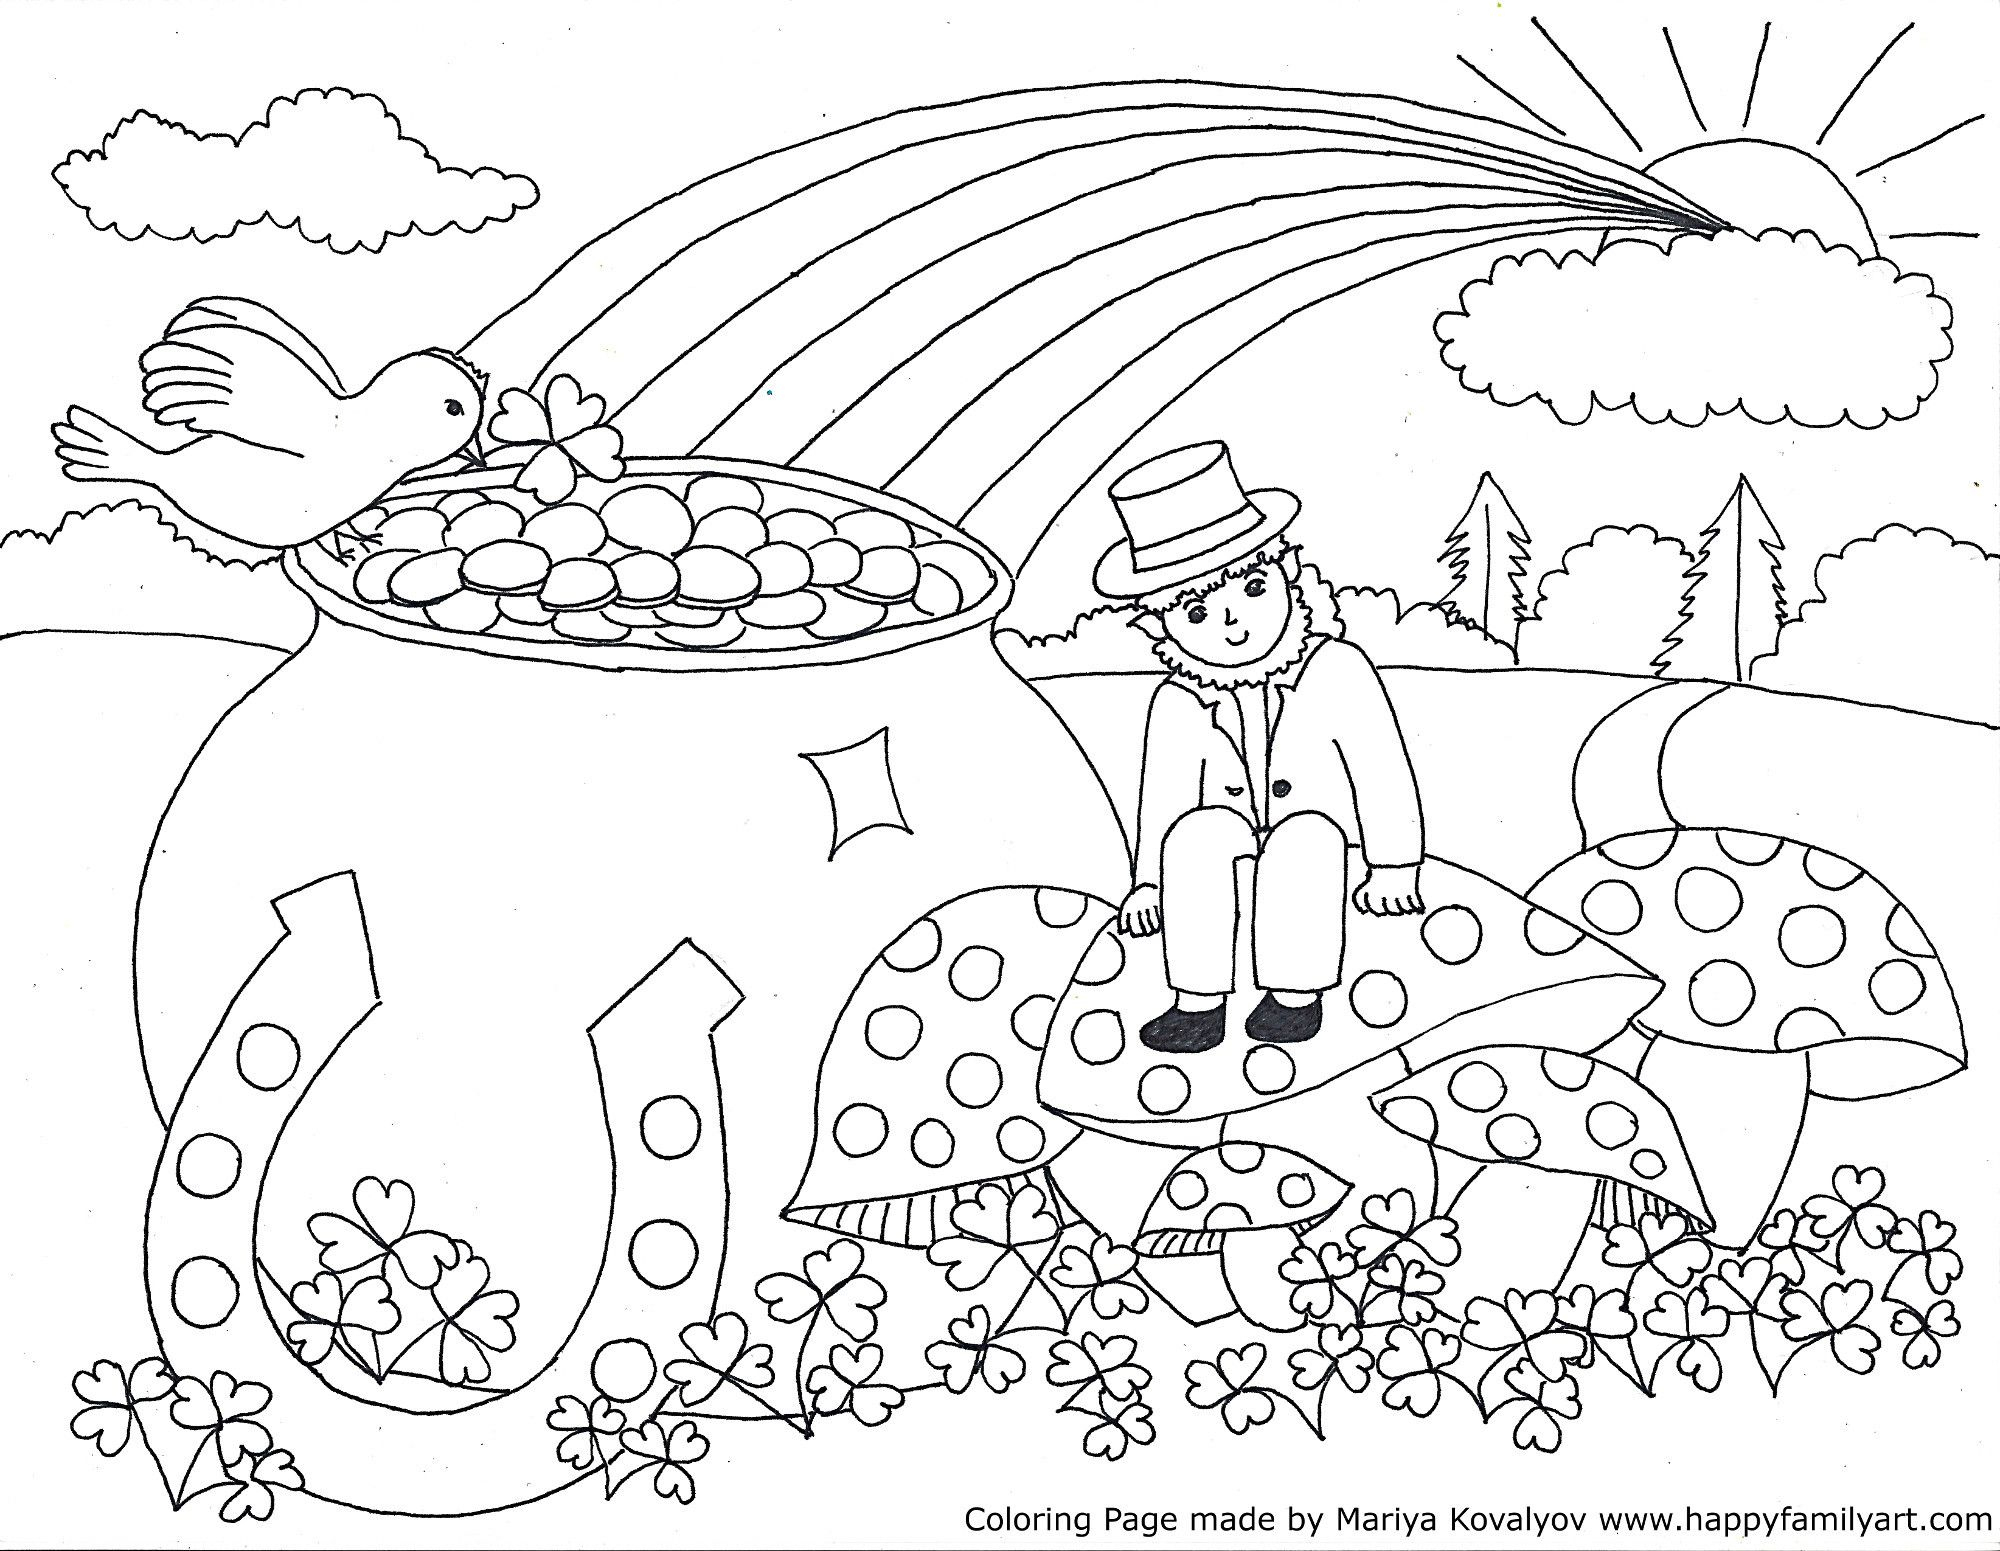 Stpatriksmedium - | Coloring Pages | Pinterest | St Patrick, St - Free Printable St Patrick Day Coloring Pages